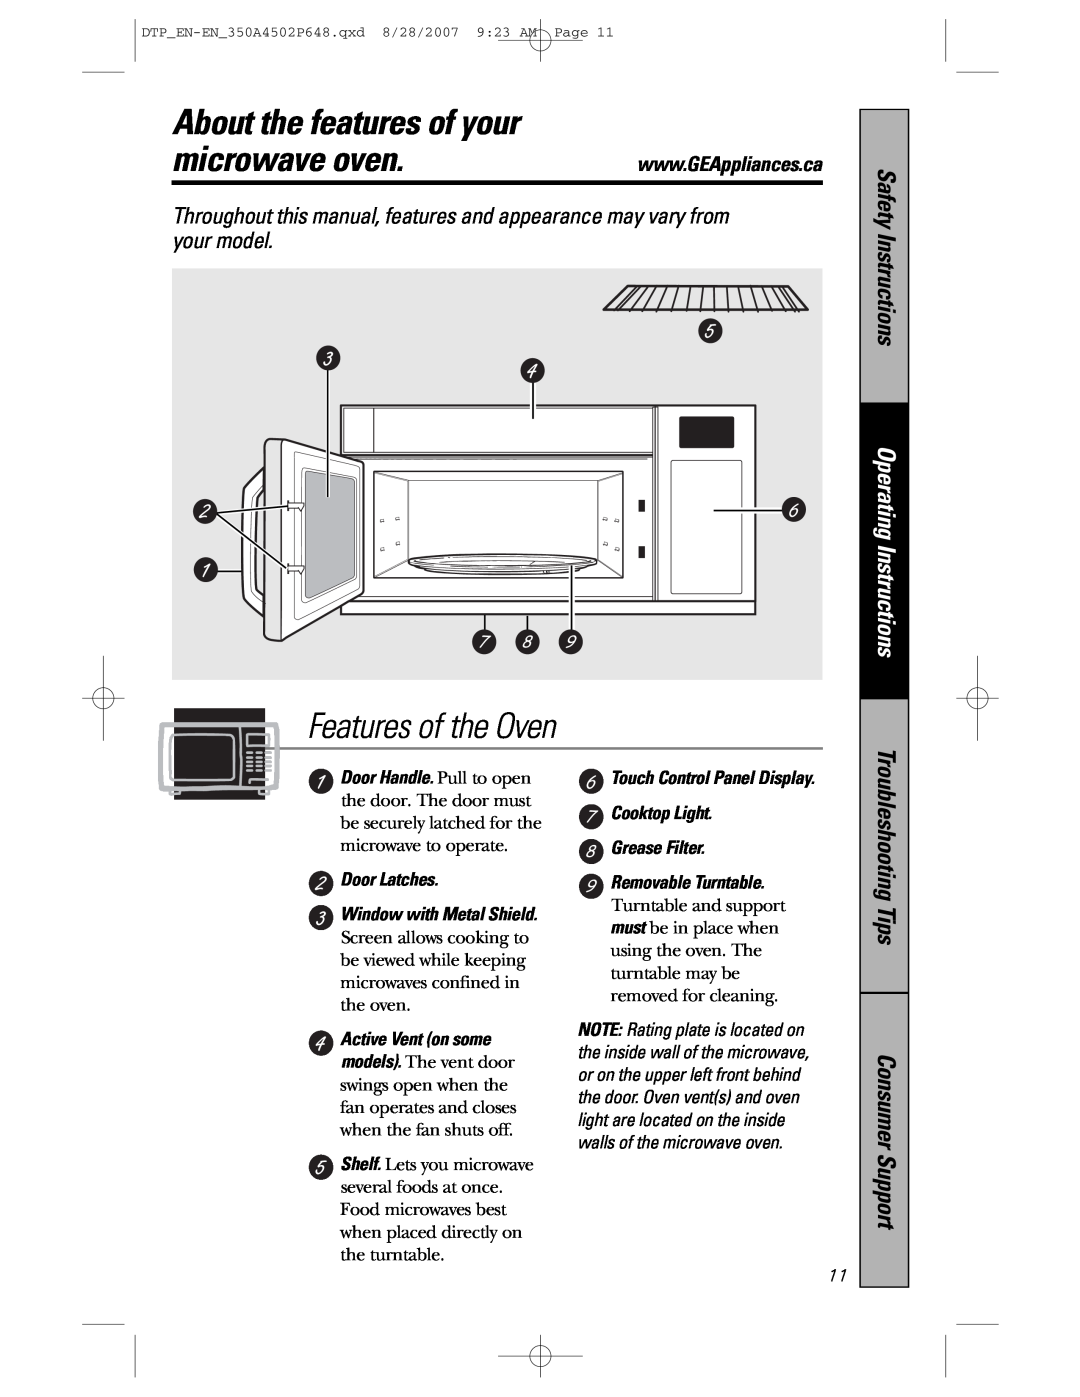 GE pvm1870 About the features of your, microwave oven, Features of the Oven, Safety Instructions, Operating Instructions 